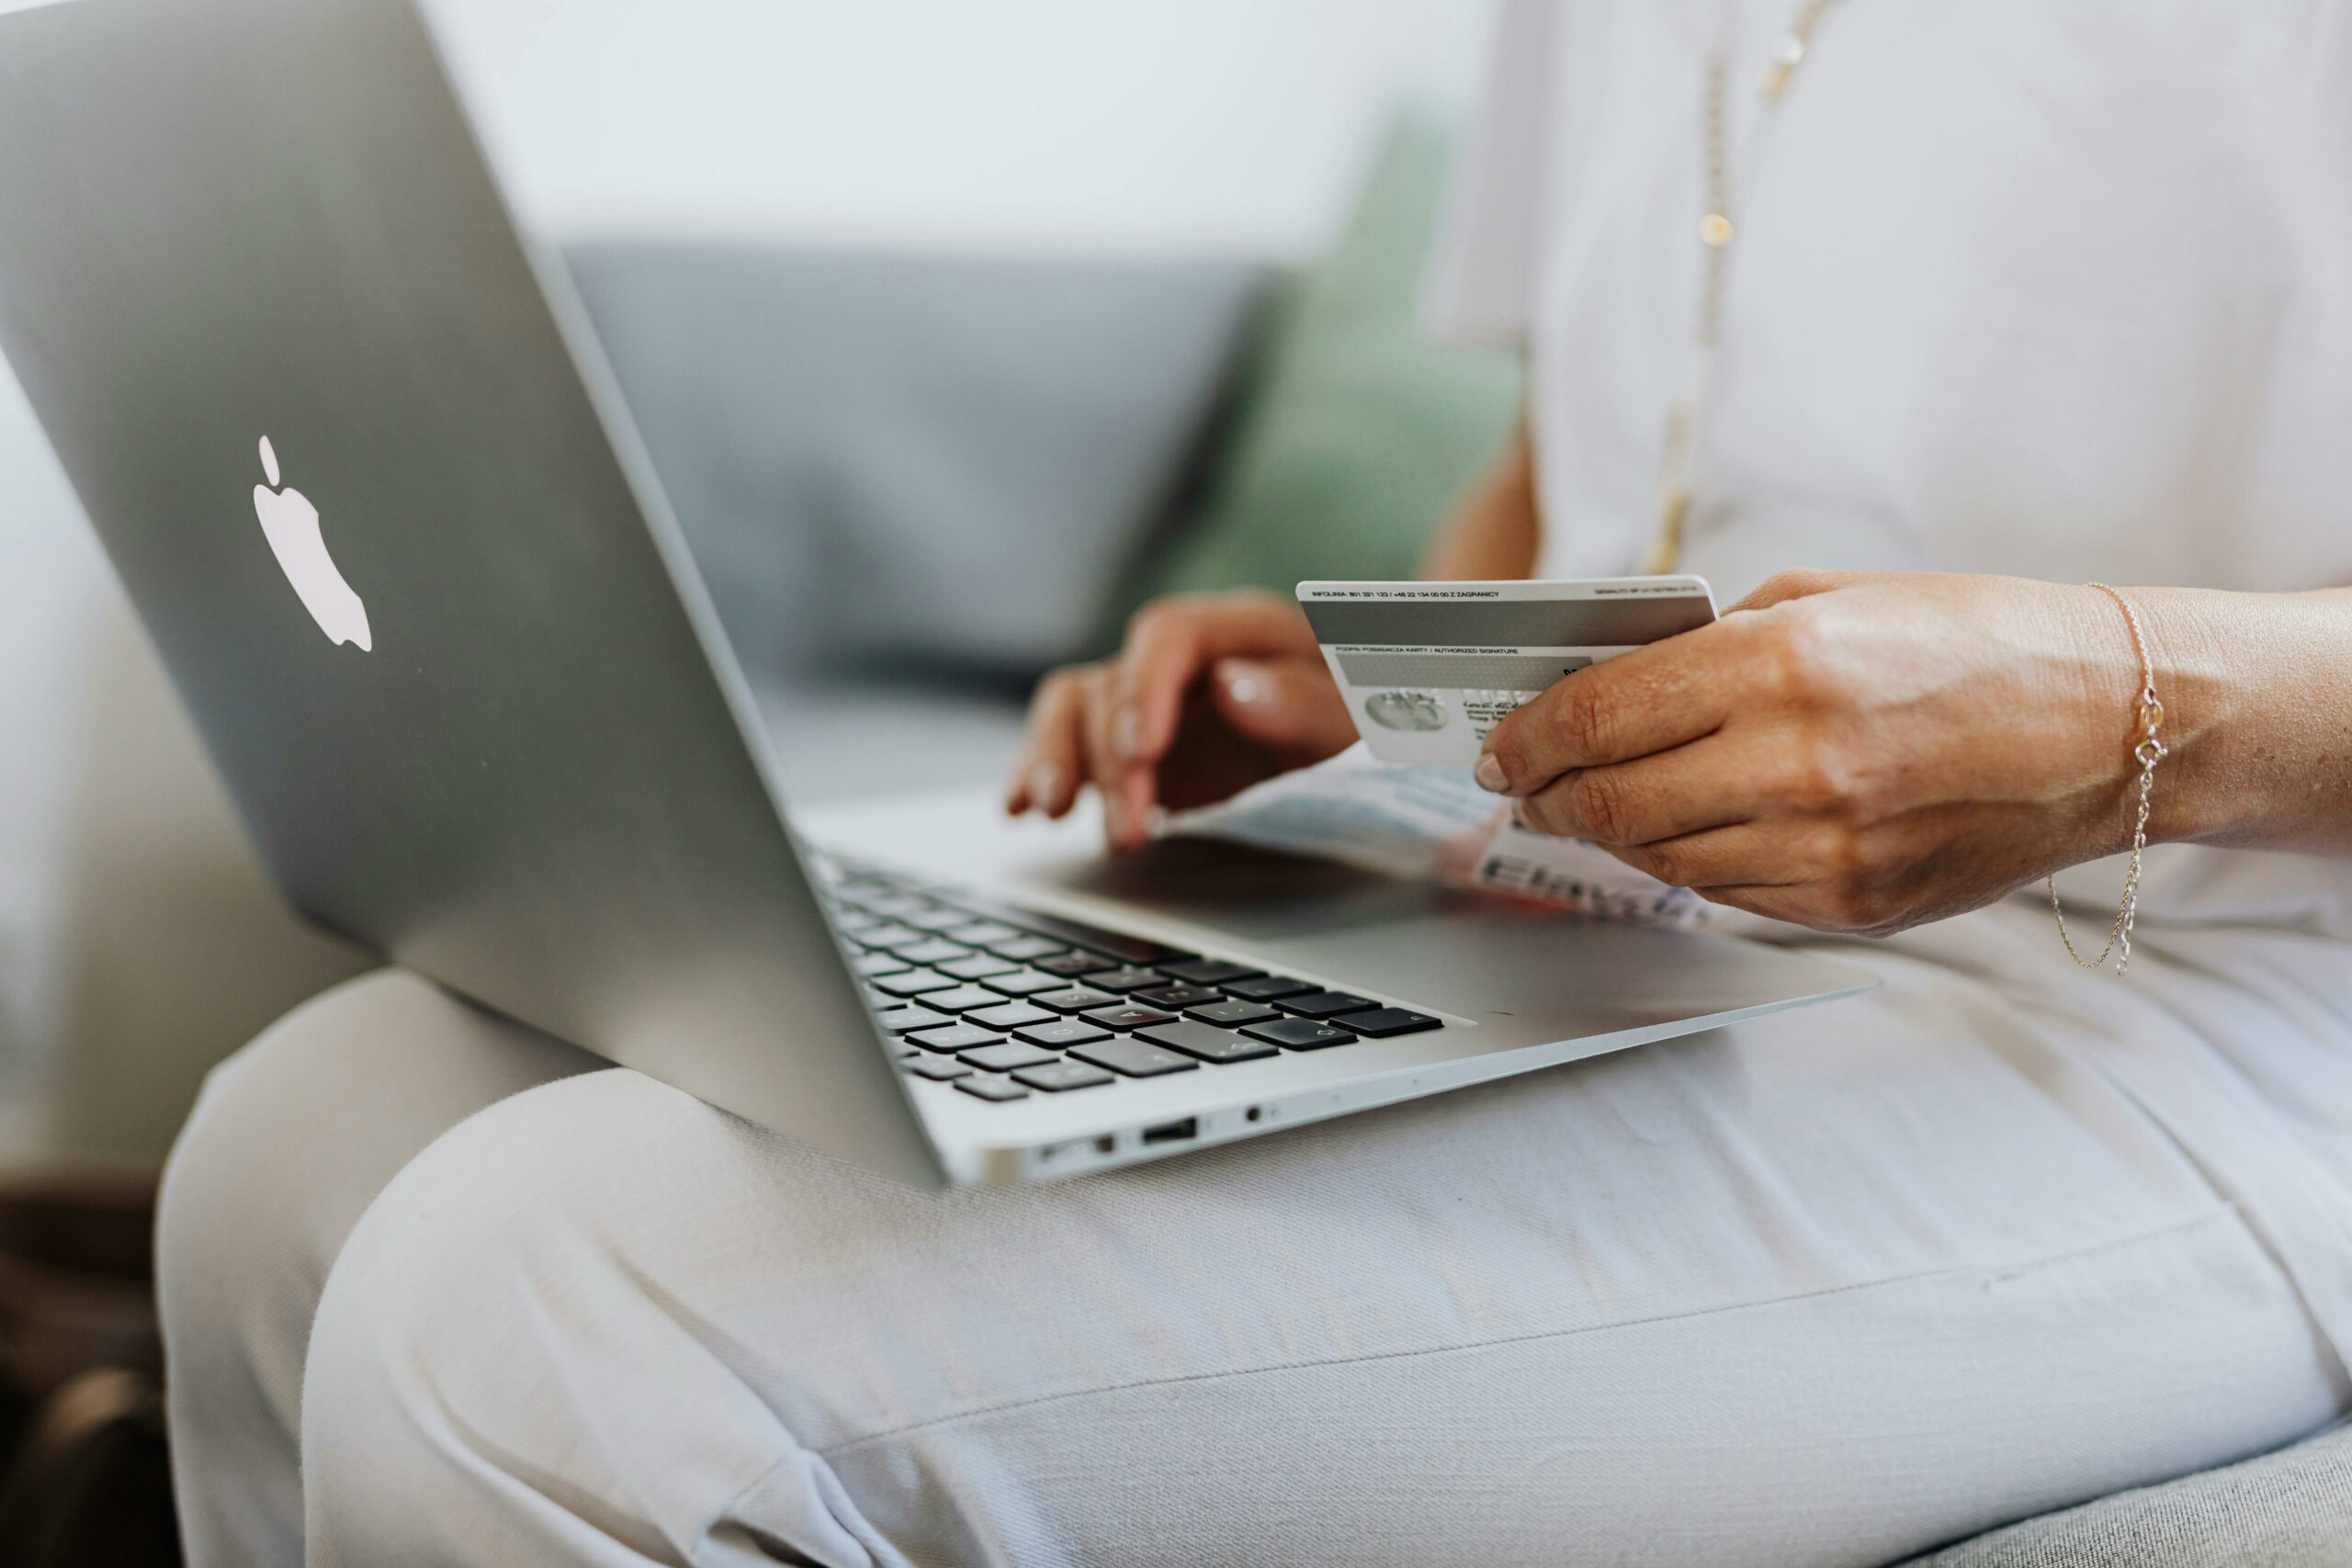 A woman sits with her laptop on her lap holding a credit card, online shopping